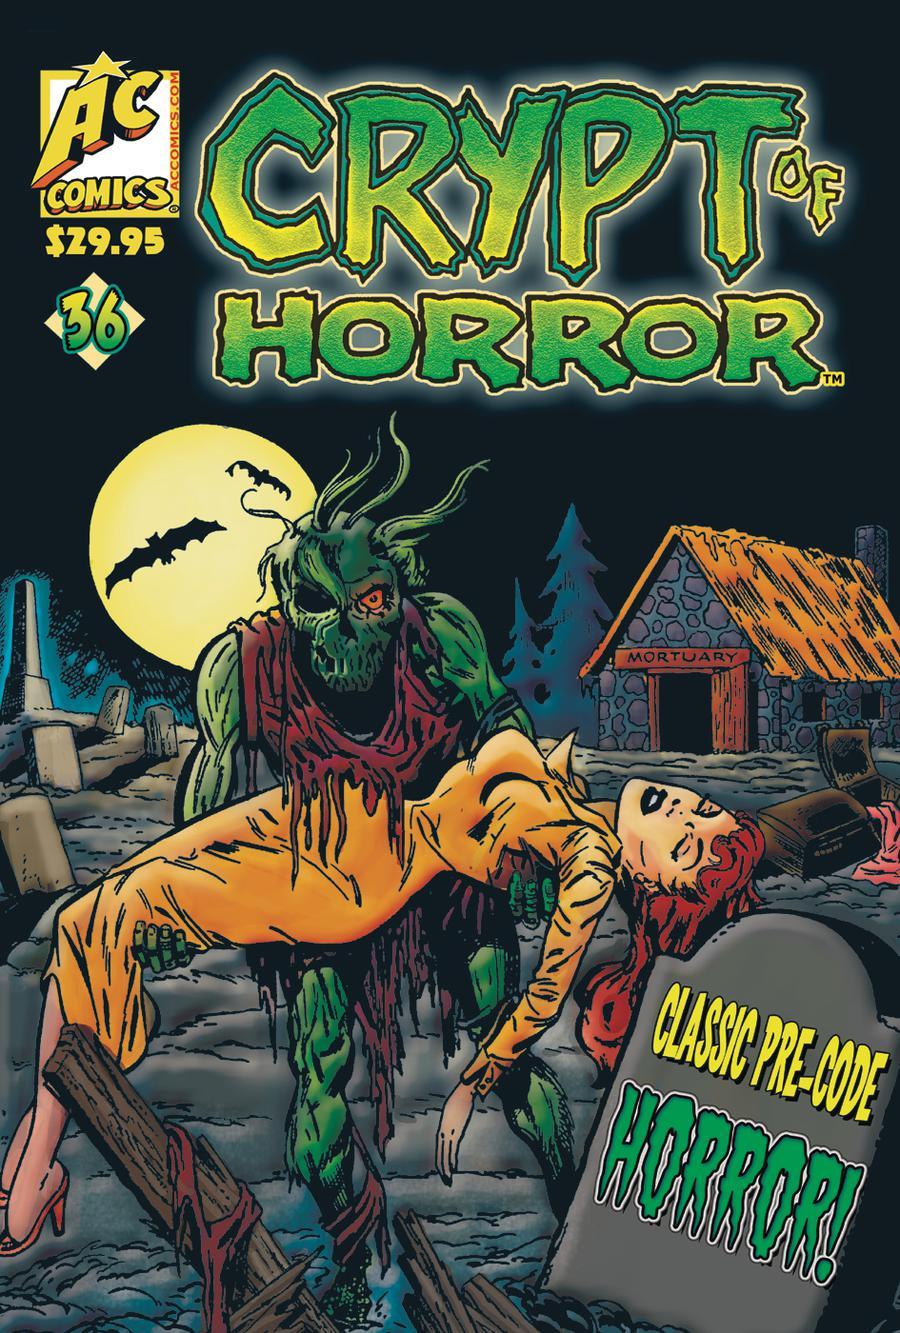 Crypt Of Horror Vol. 1 #36